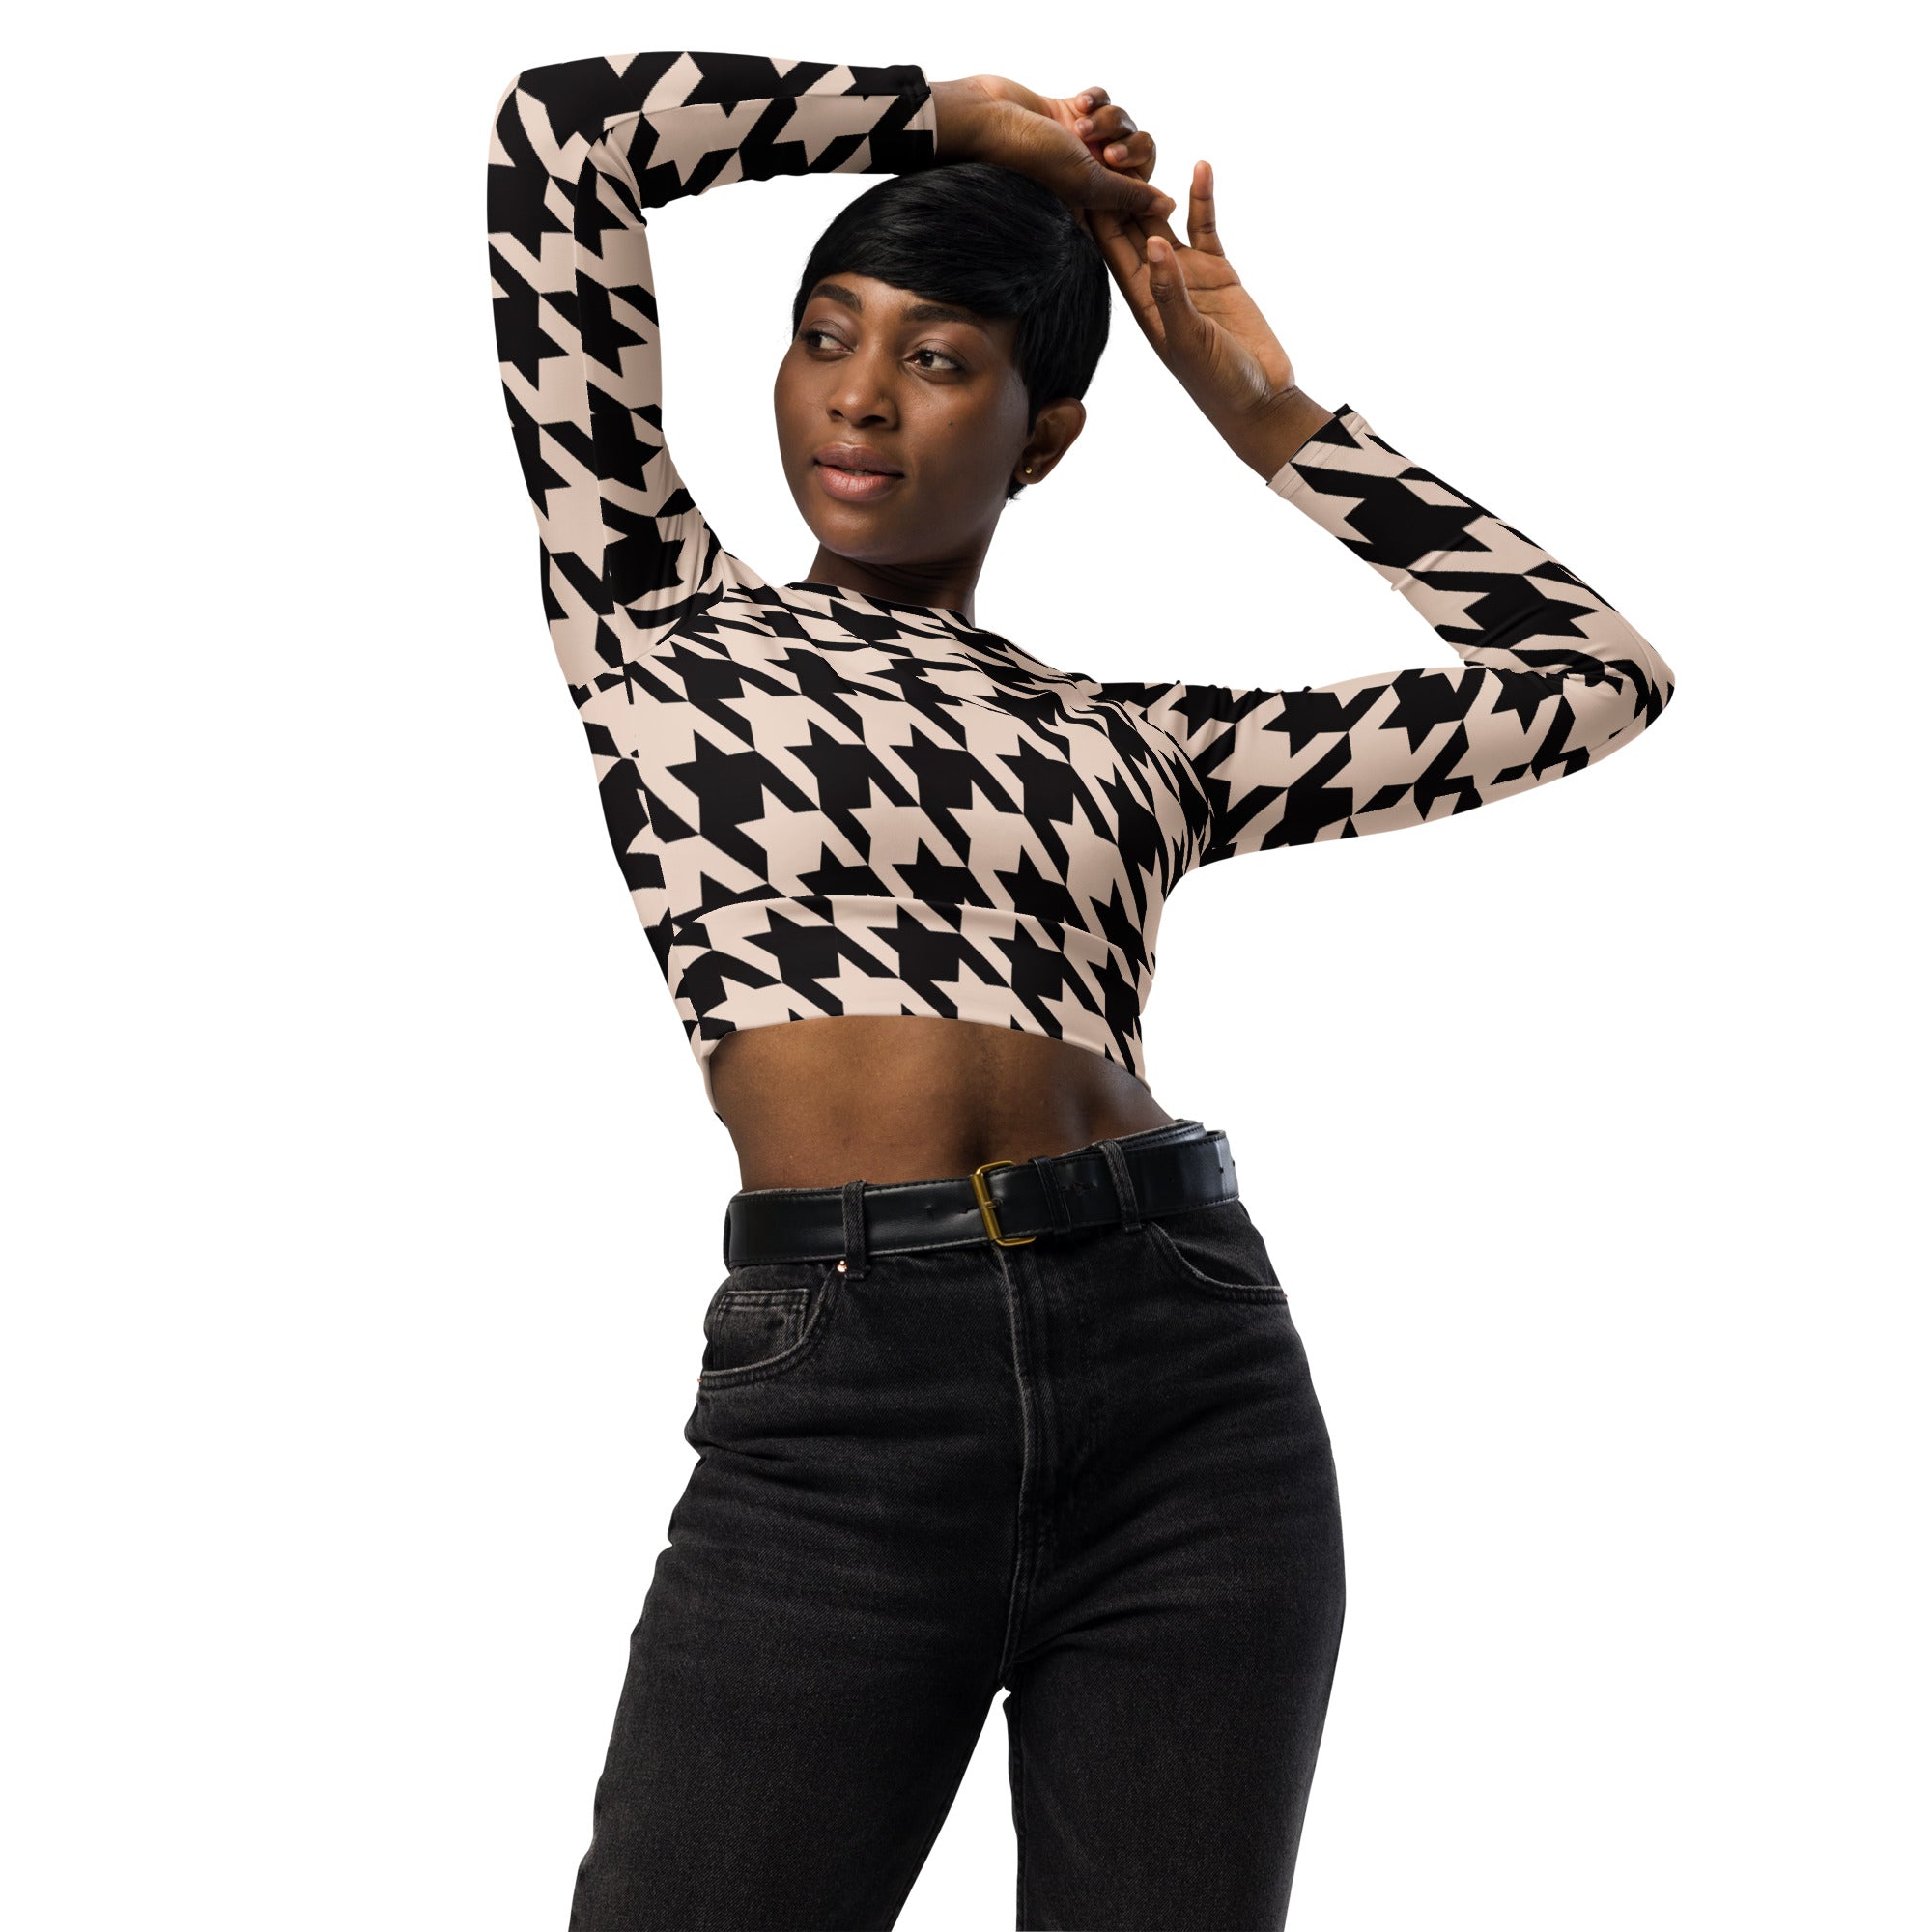 Her Recycled long-sleeve crop top